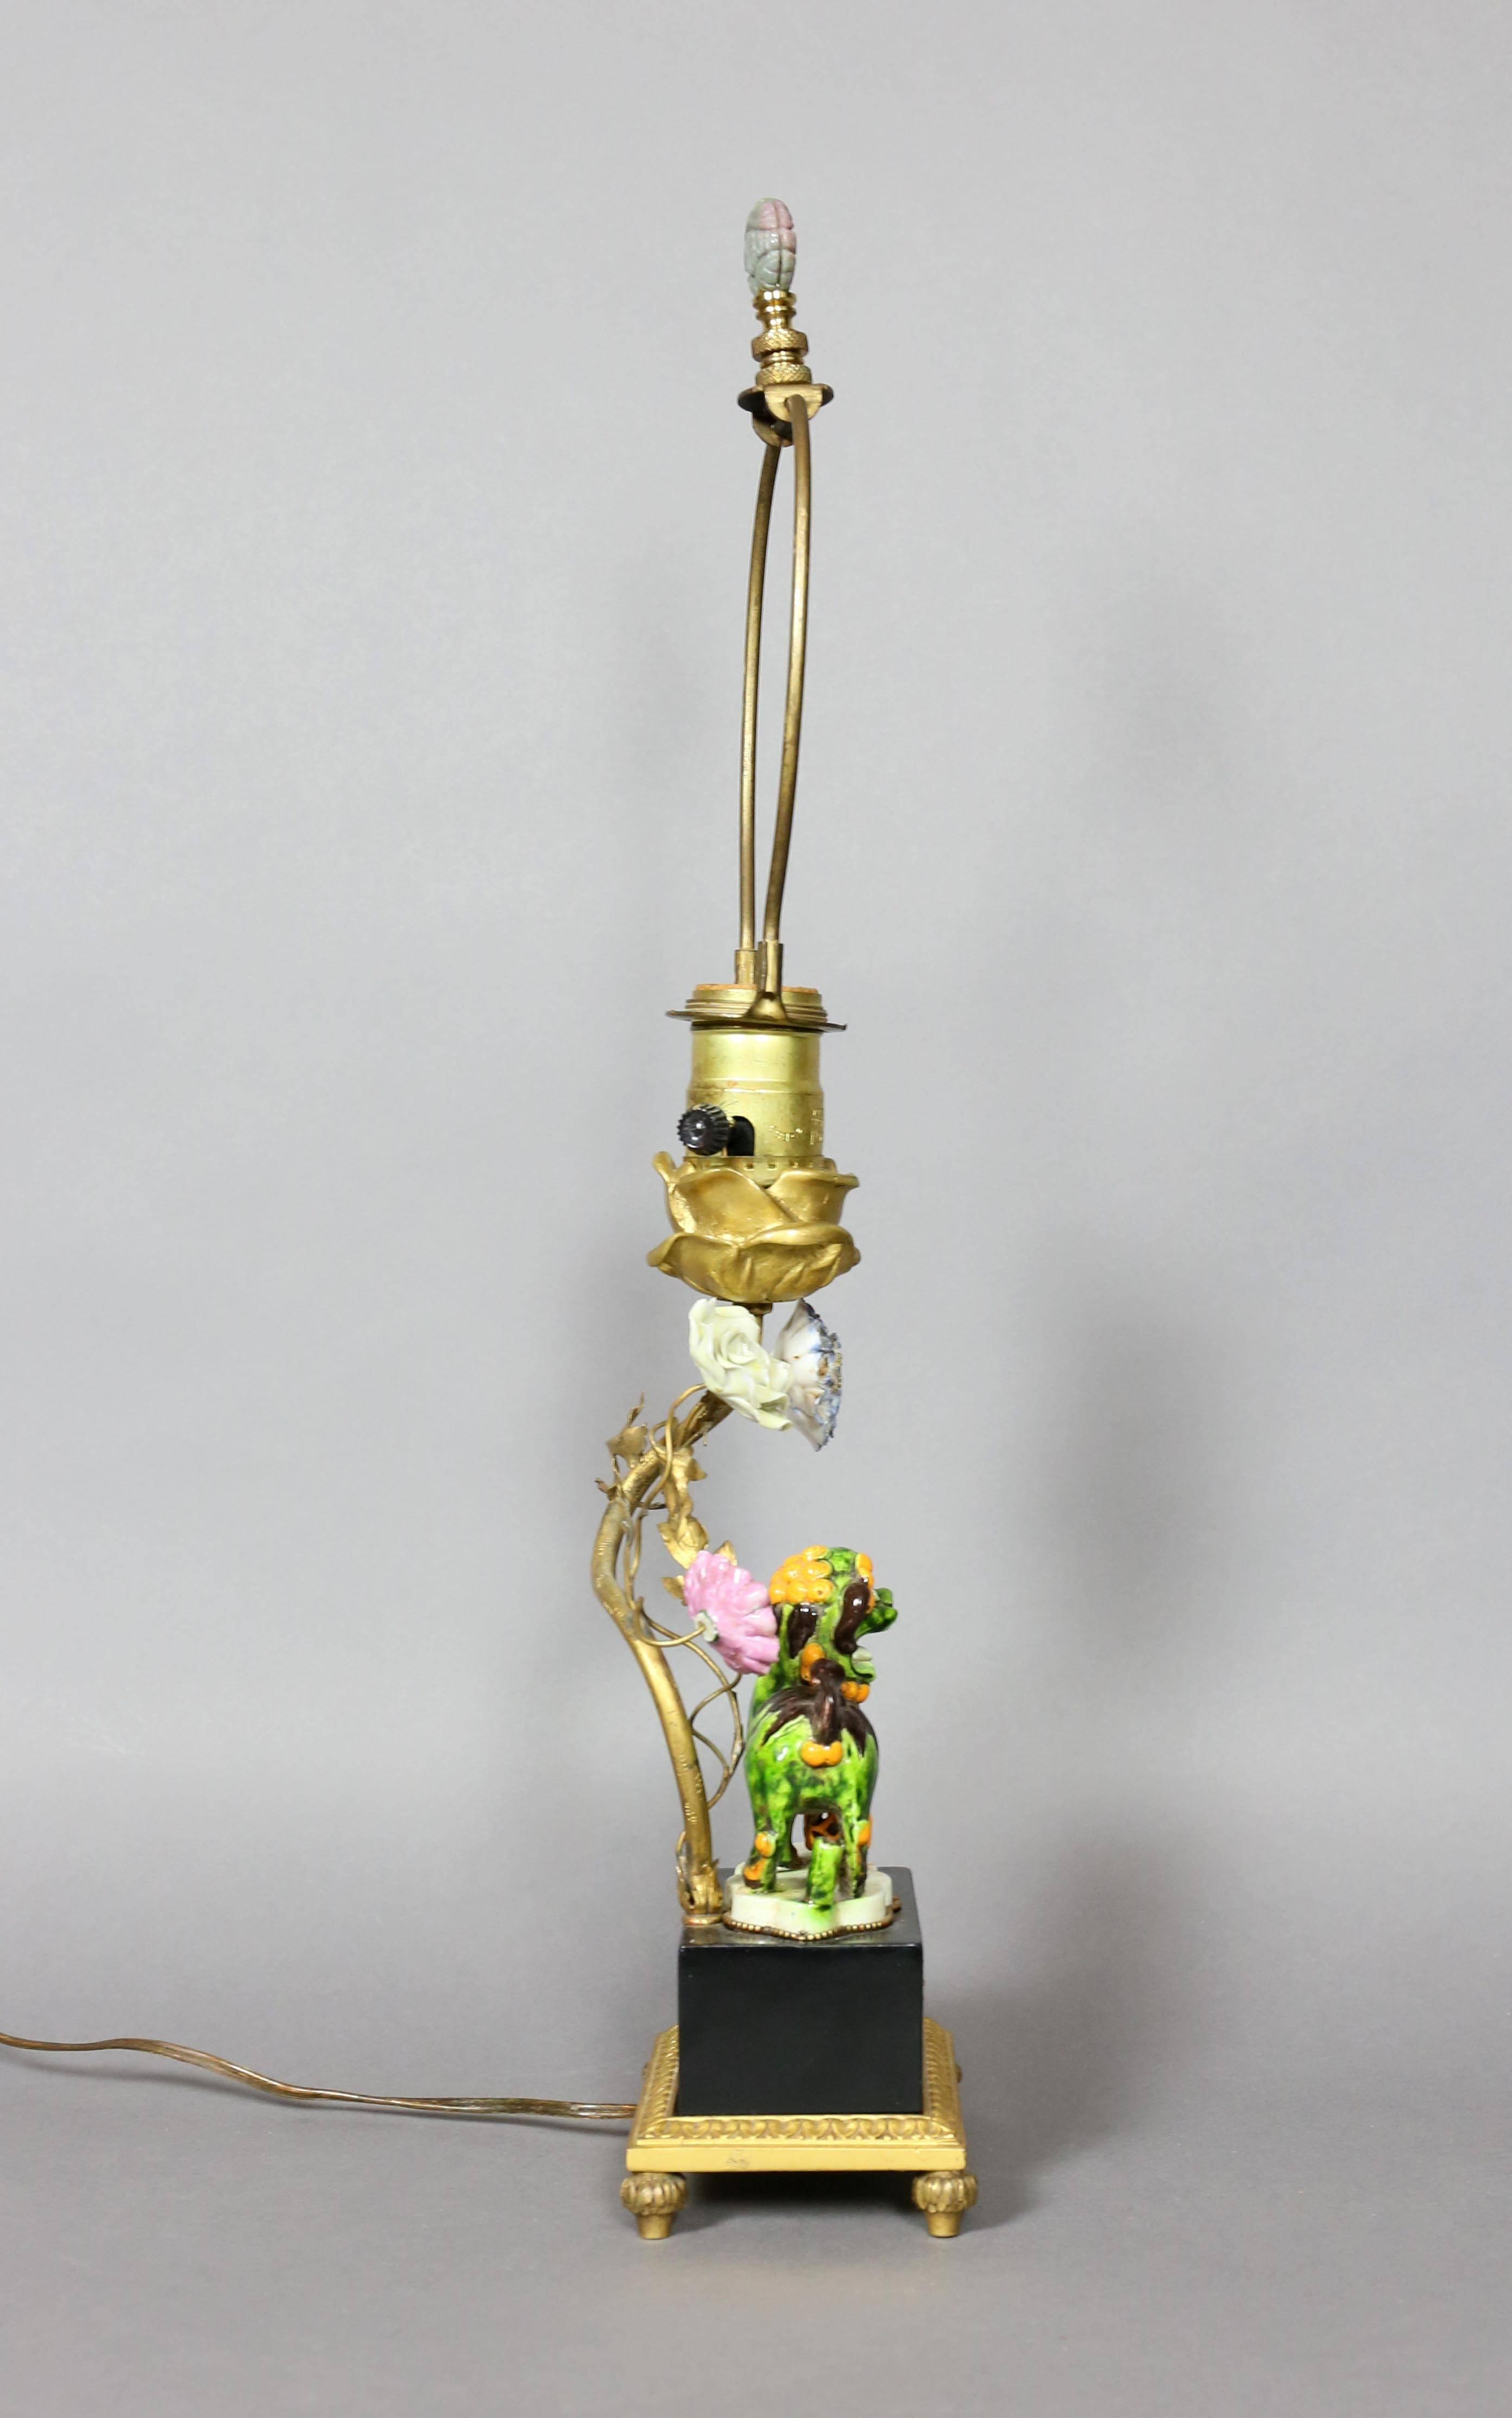 The pooch painted in greens, browns and orange with paw on a pierces ball, cartouche shaped base, mounted on an ebonized base with enamelled cartouche, leaf tip bronze feet. Light stem with mounted porcelain flowers.